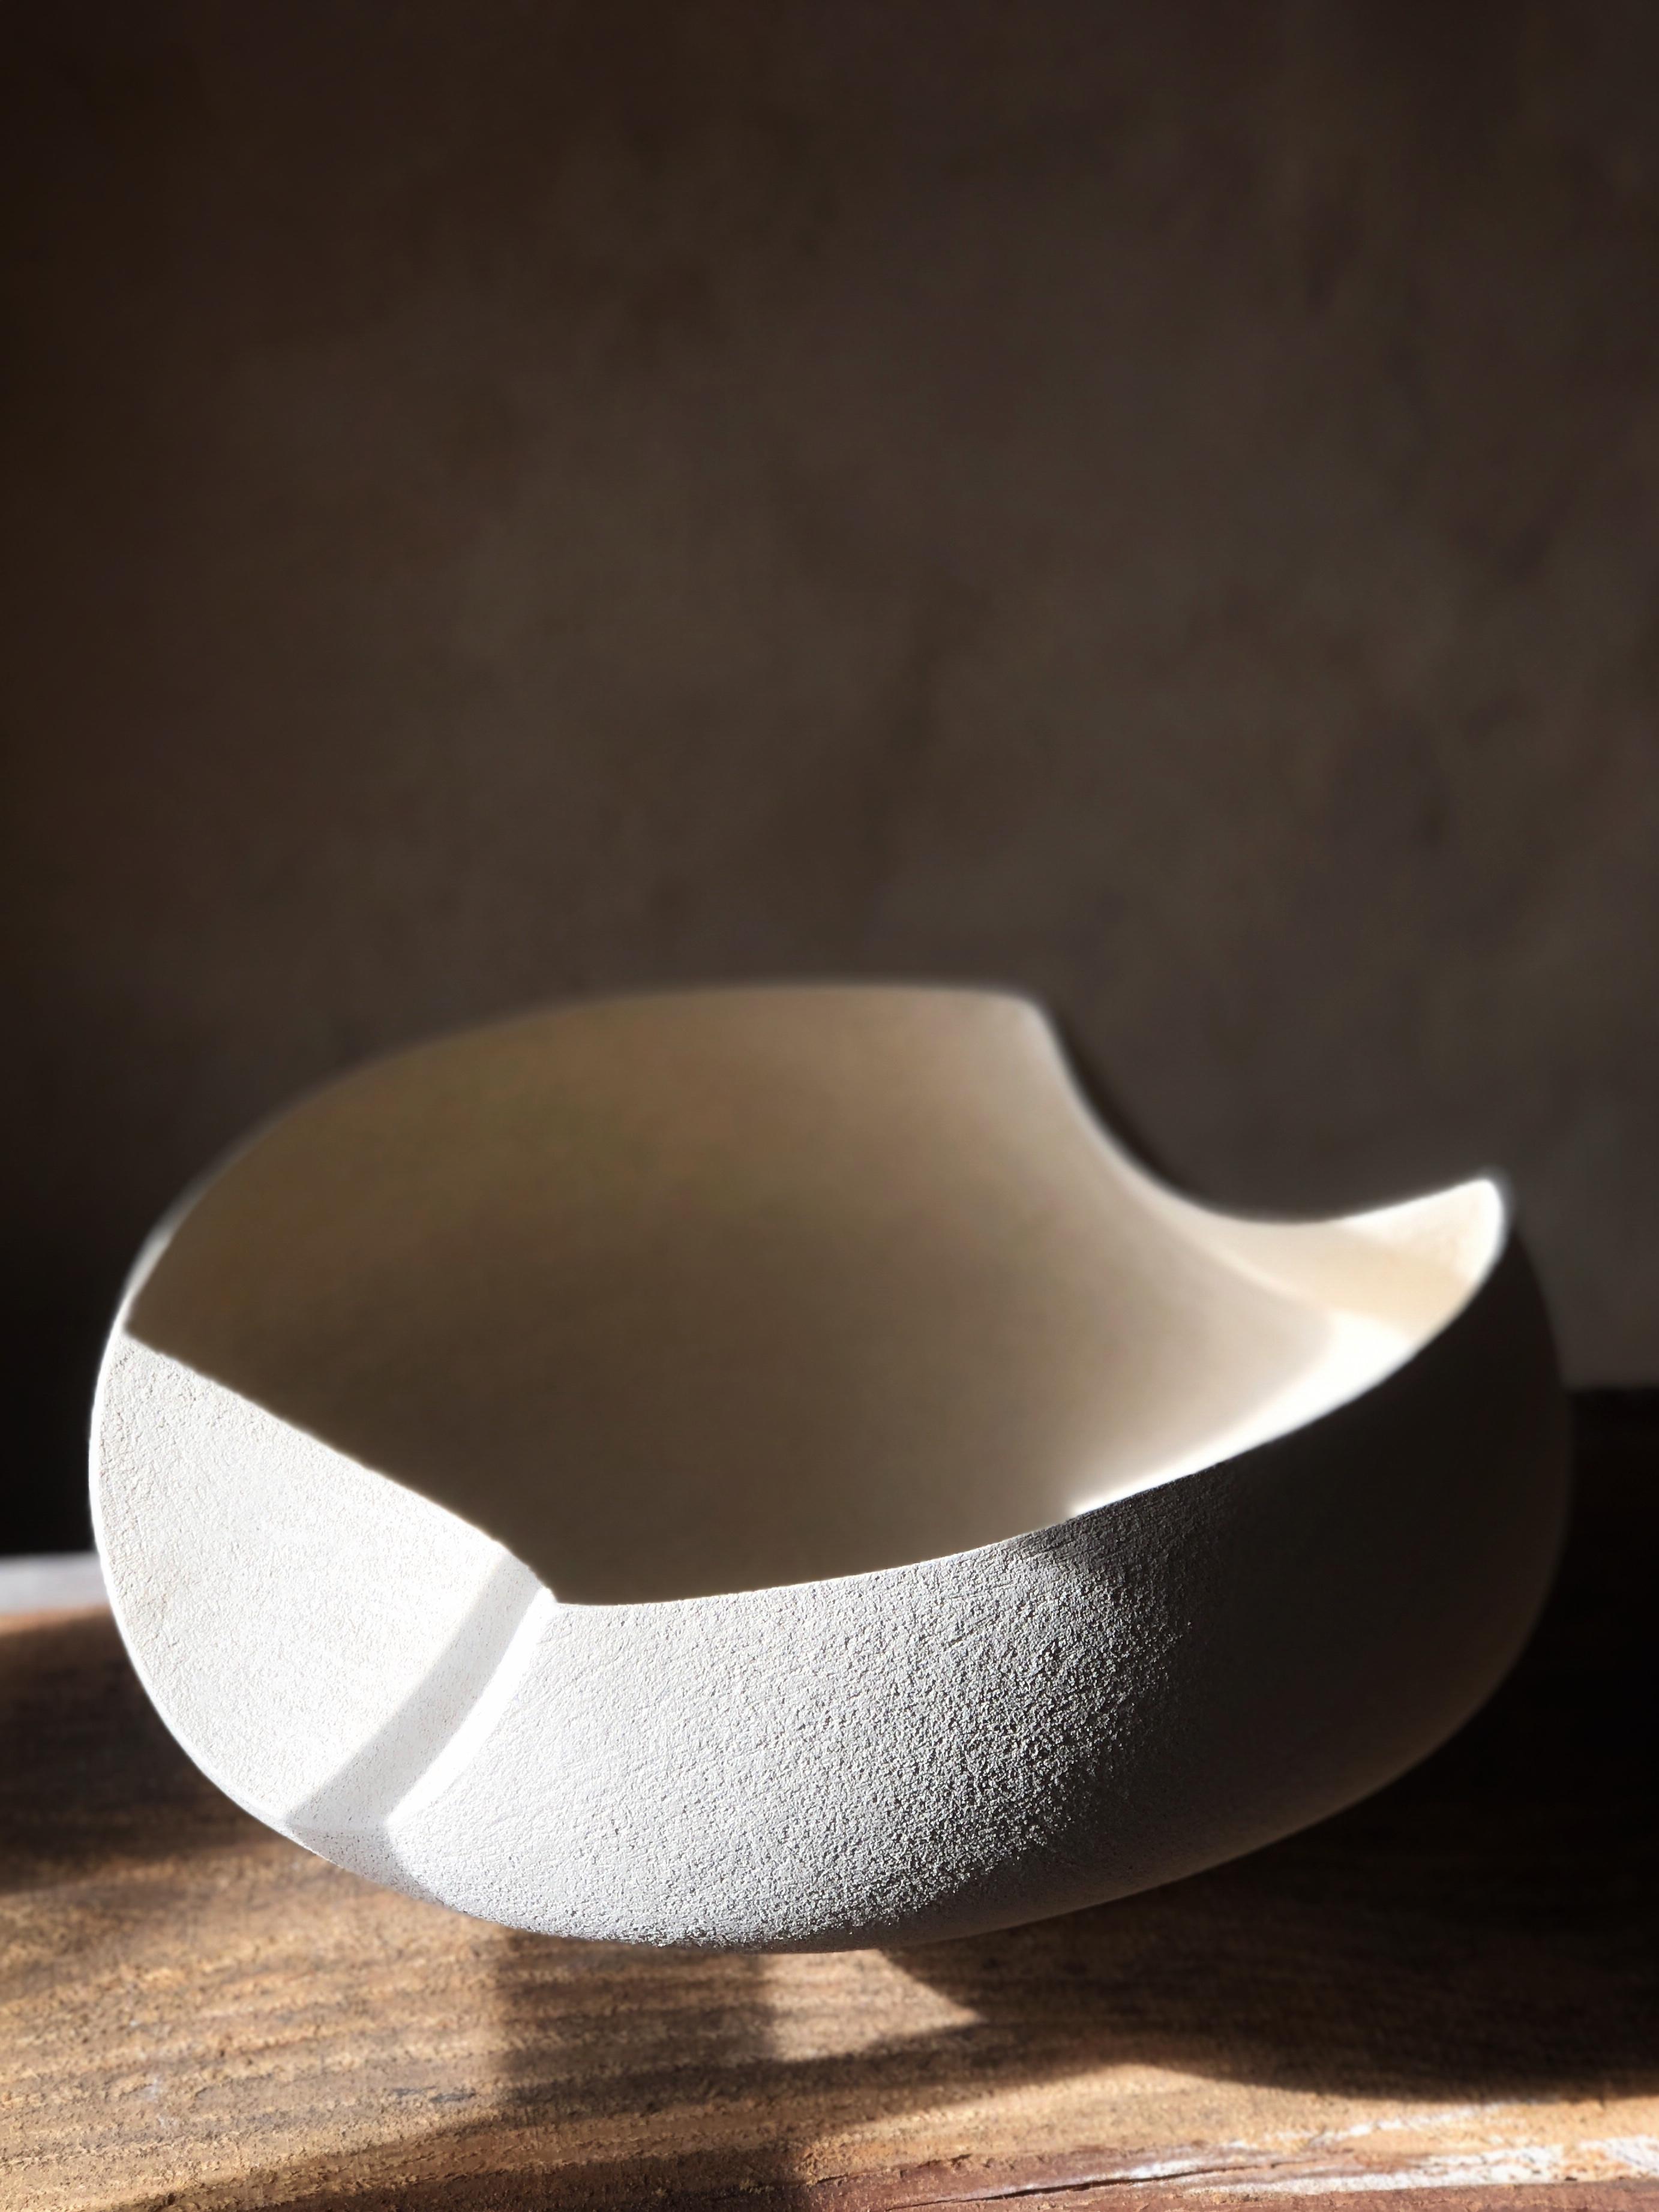 Symétrical Bowl 02 by Sophie Vaidie
One Of A Kind.
Dimensions: D 35 x W 38 x H 20 cm. 
Materials: Brutal Beige stoneware with fine chamotte.

In the beginning, there was a need to make, with the hands, the touch, the senses. Then came the desire to